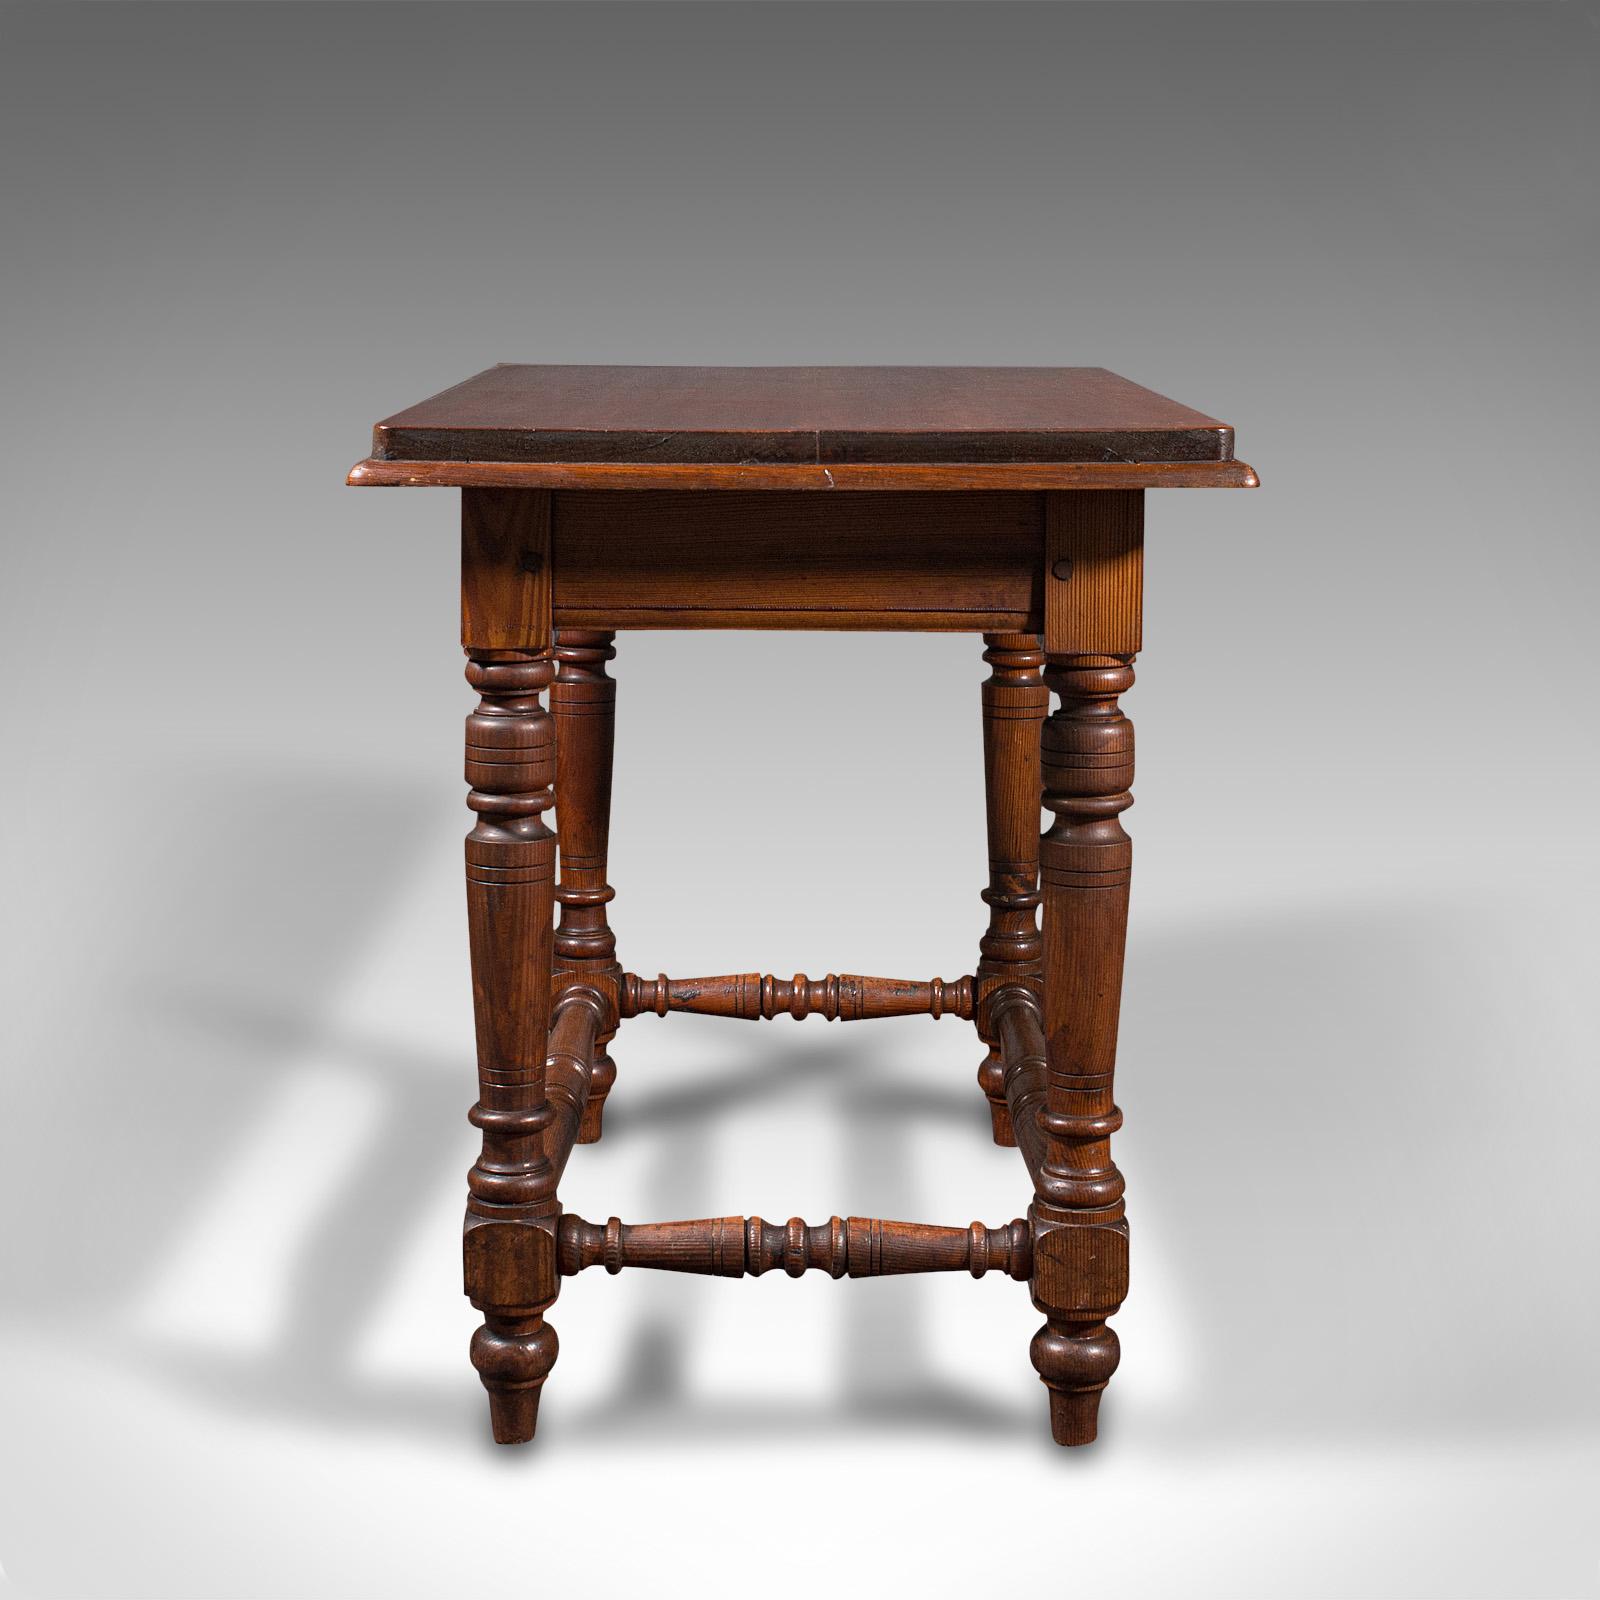 British Antique Console Table, English, Pine, Ecclesiastical, Side, Victorian, C.1880 For Sale